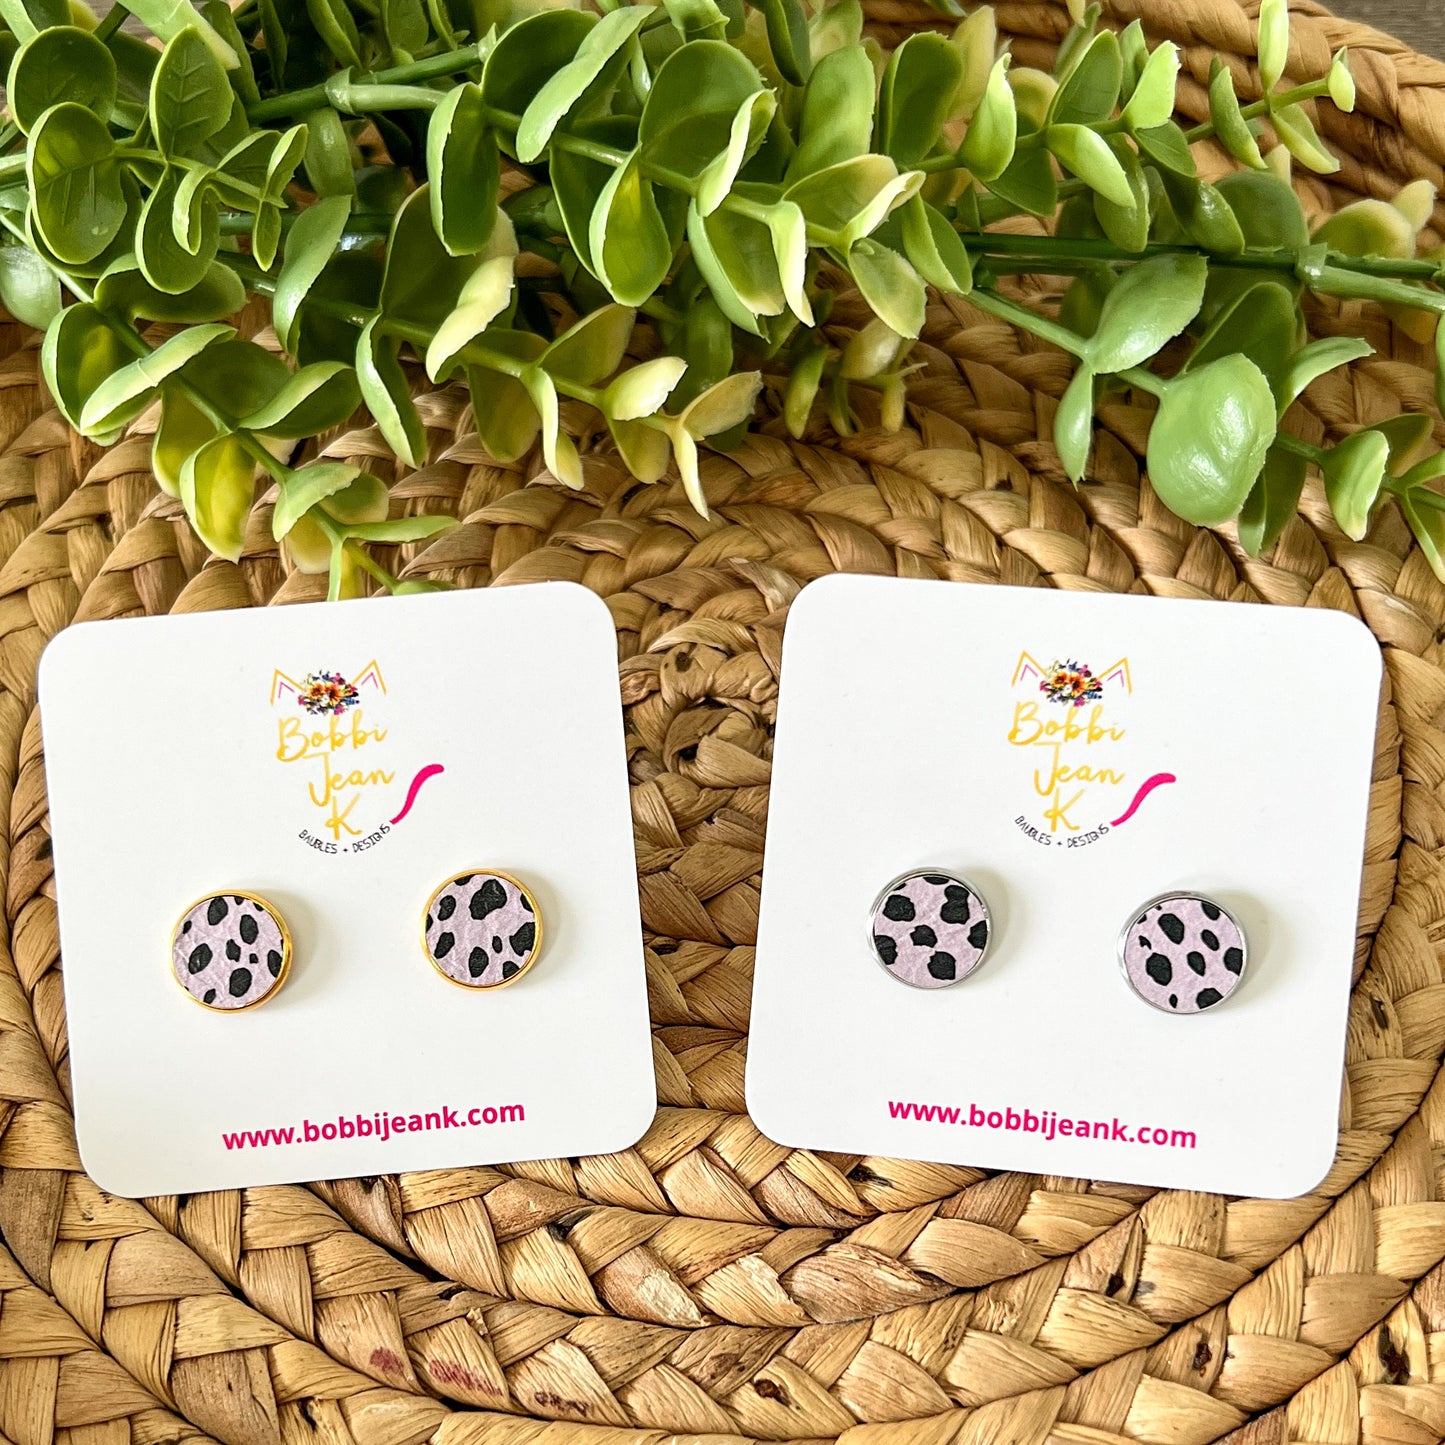 Lavender, Blue, and/or Cantaloupe Spotted Leather Studs: Choose Set of 3 or Individual in Silver or Gold Settings